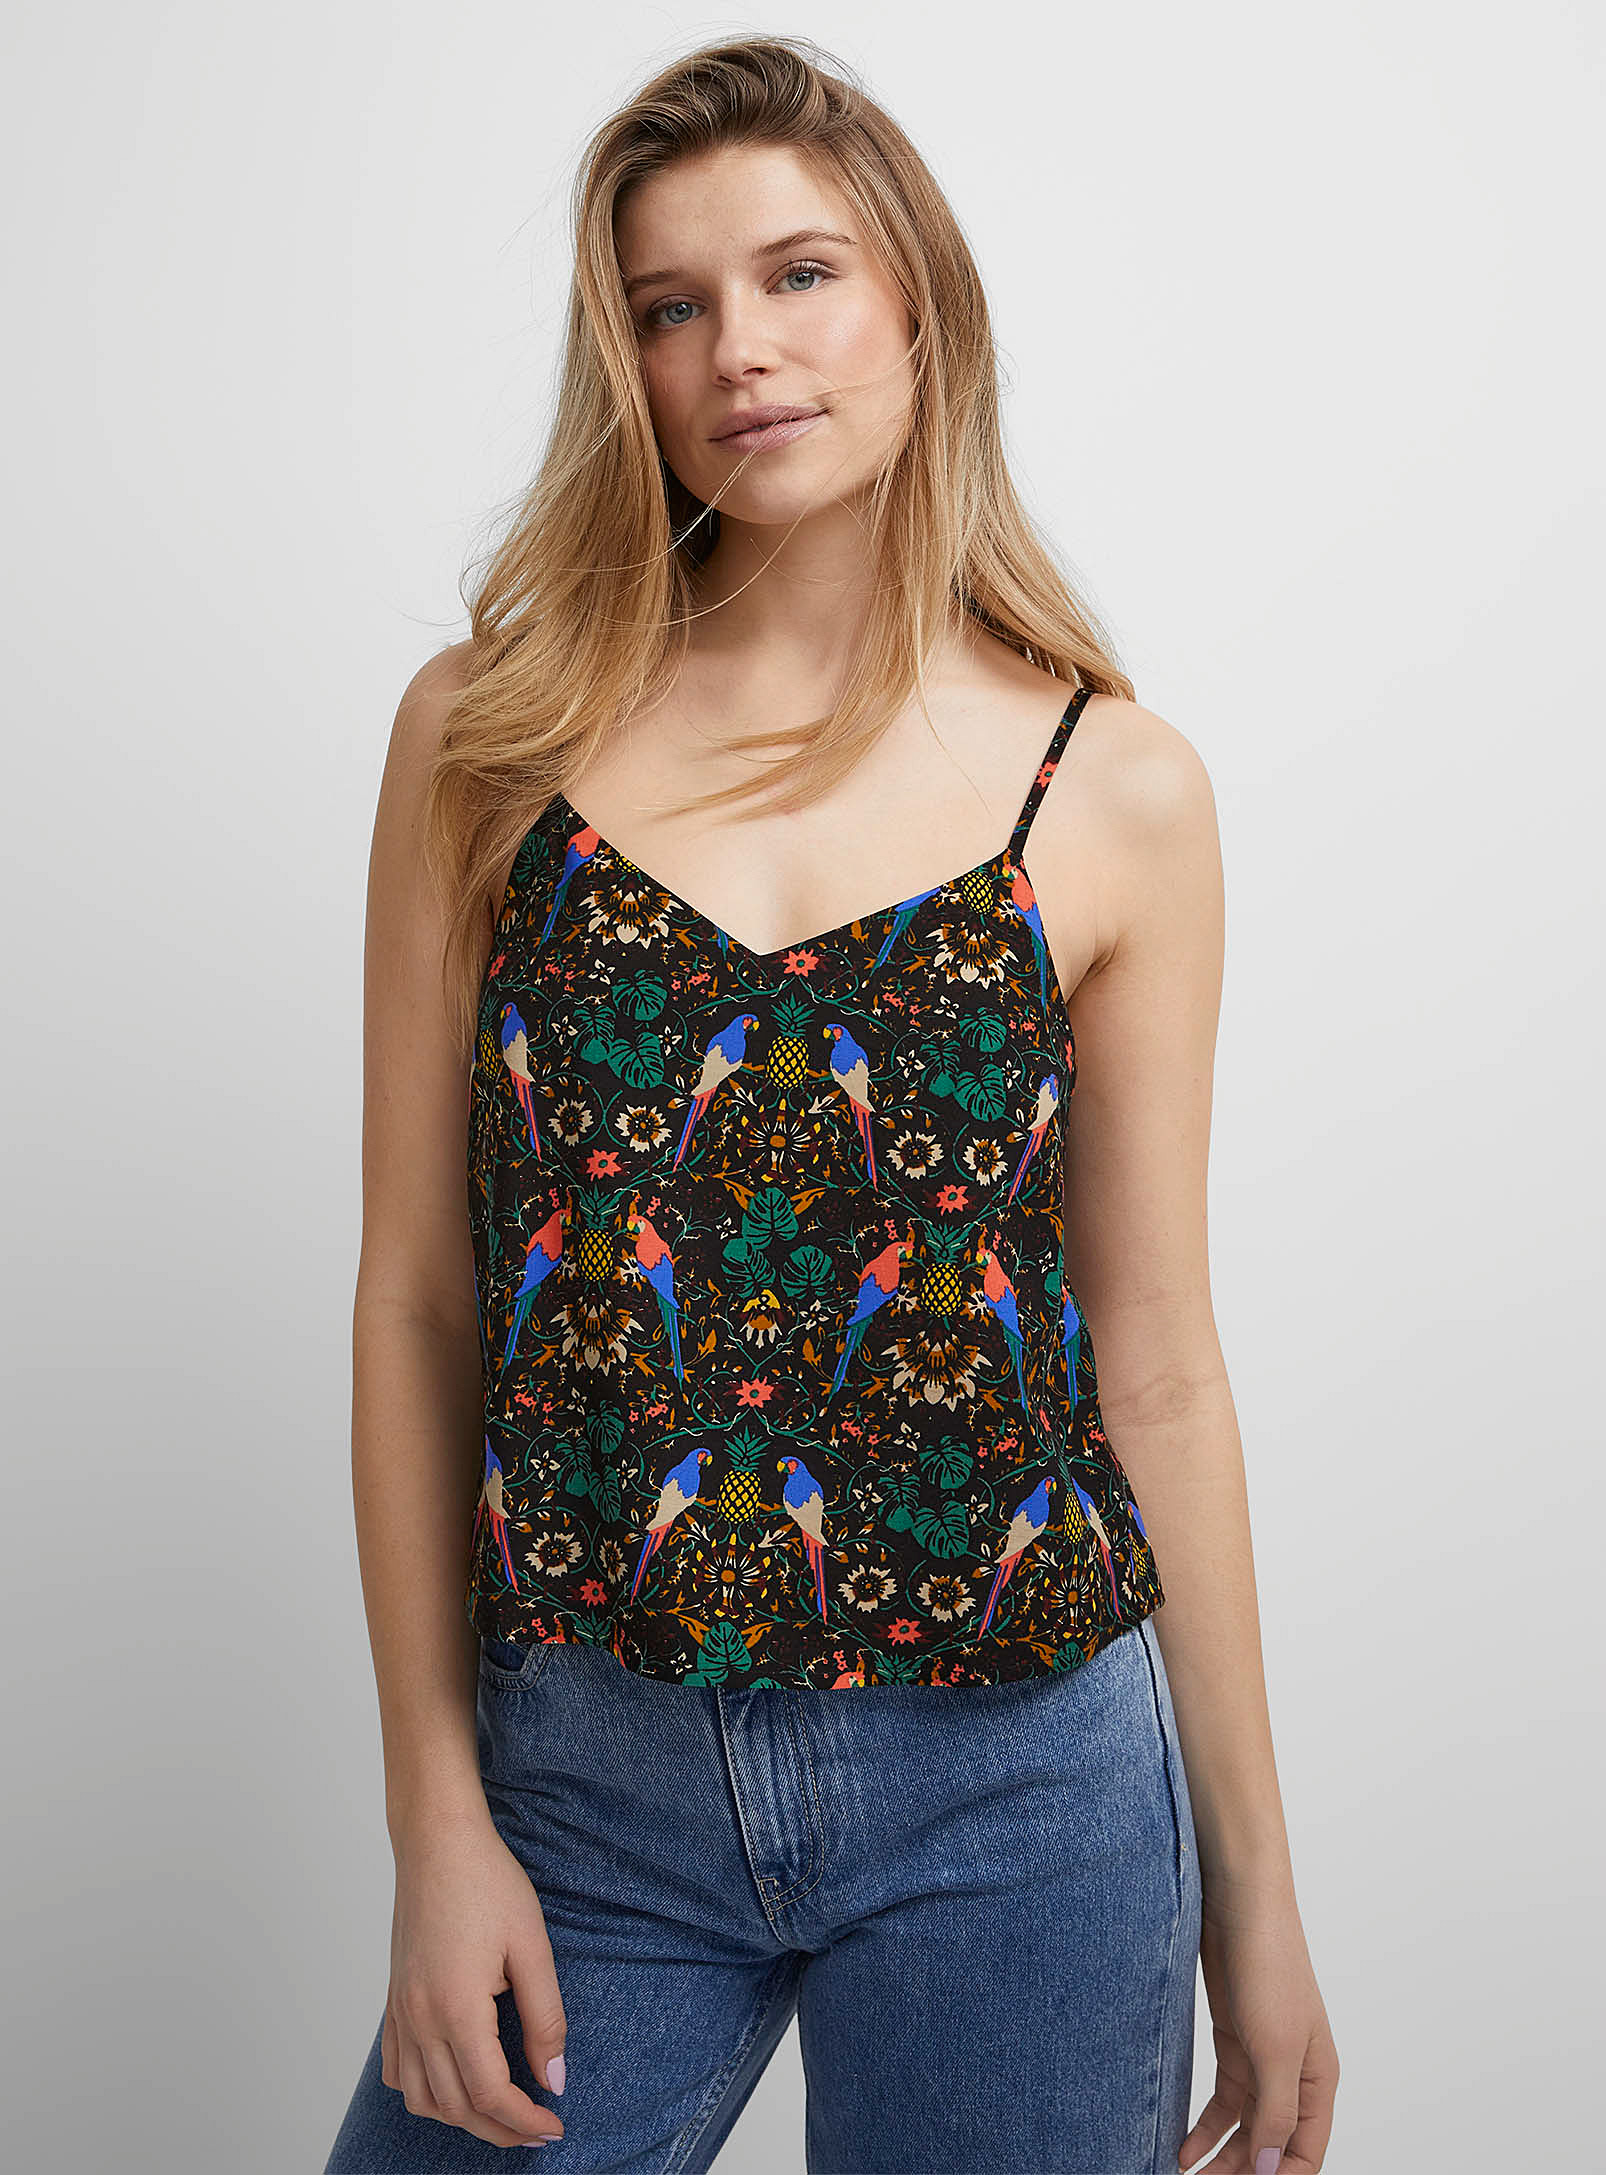 Icone Thin Straps Cropped Cami In Patterned Black